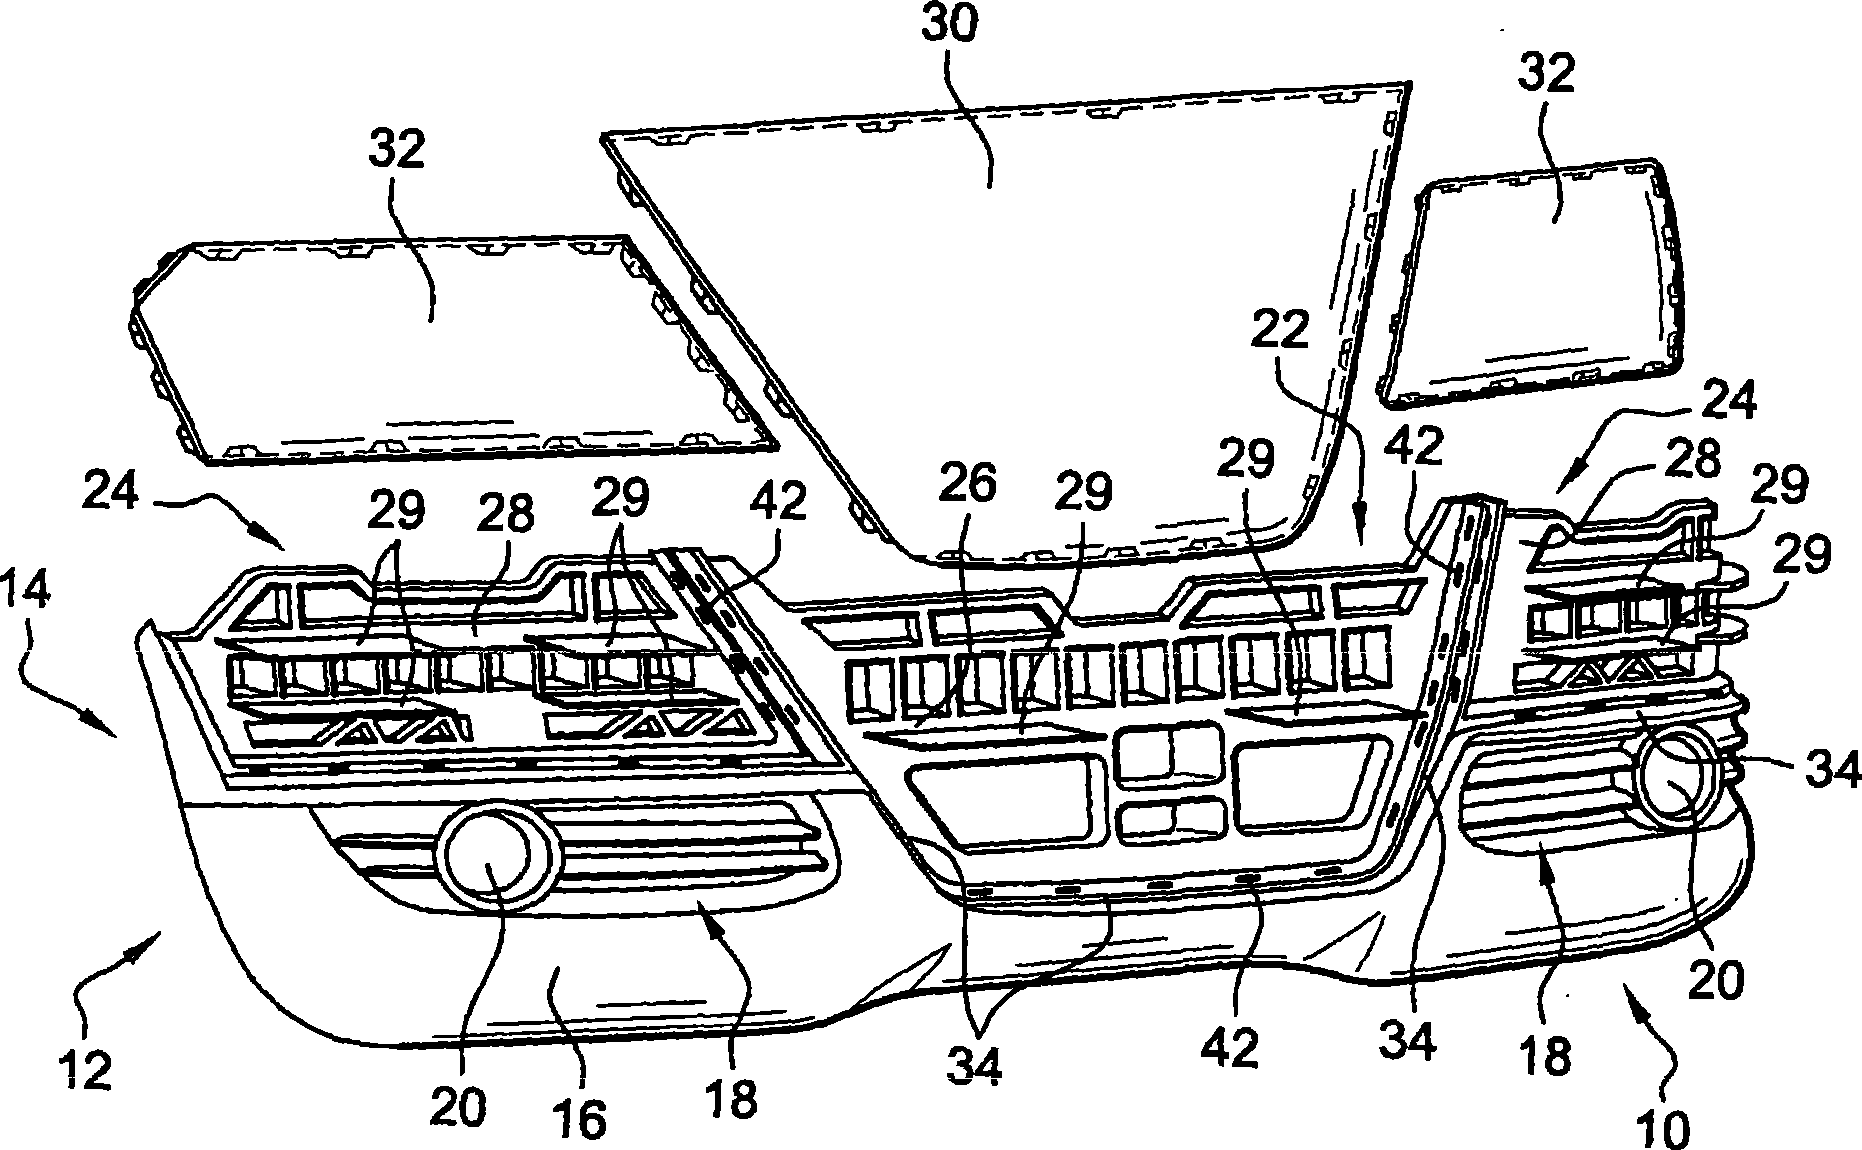 Set of a self-supporting mosaic of an automotive vehicle and at least one body panel, set of at least two self-supporting mosaics and body panel